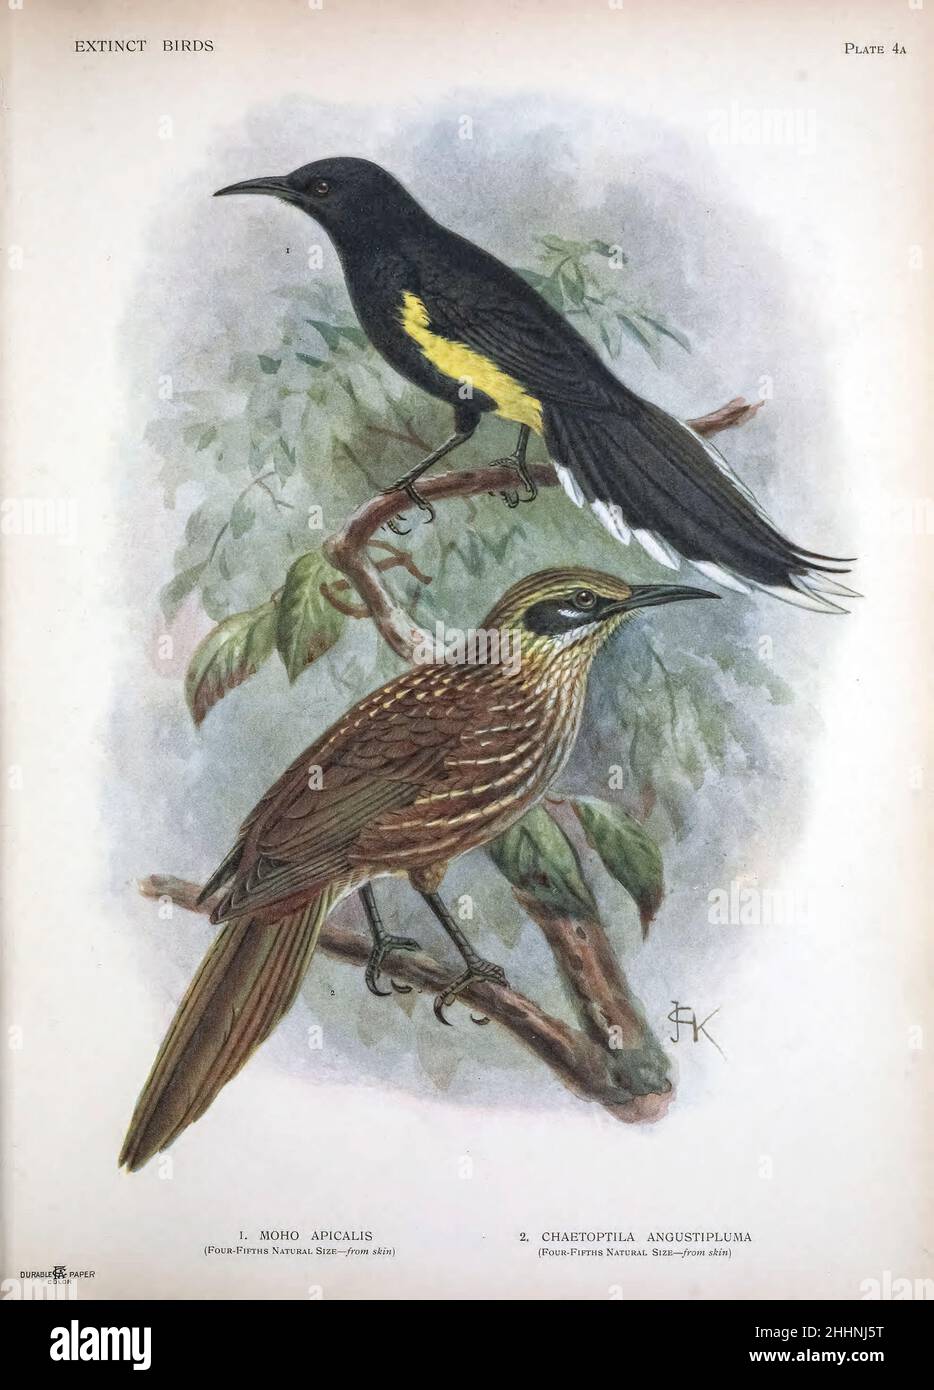 1.  O‘ahu ‘ō‘ō (Moho apicalis) was a member of the extinct genus of the ‘ō‘ōs (Moho) within the extinct family Mohoidae. It was previously regarded as member of the Australo-Pacific honeyeaters (Meliphagidae) 2. CThe kioea (Chaetoptila angustipluma) was a endemic Hawaiian bird that became extinct around the mid-19th century. from ' Extinct birds ' : an attempt to unite in one volume a short account of those birds which have become extinct in historical times : that is, within the last six or seven hundred years : to which are added a few which still exist, but are on the verge of extinction. b Stock Photo